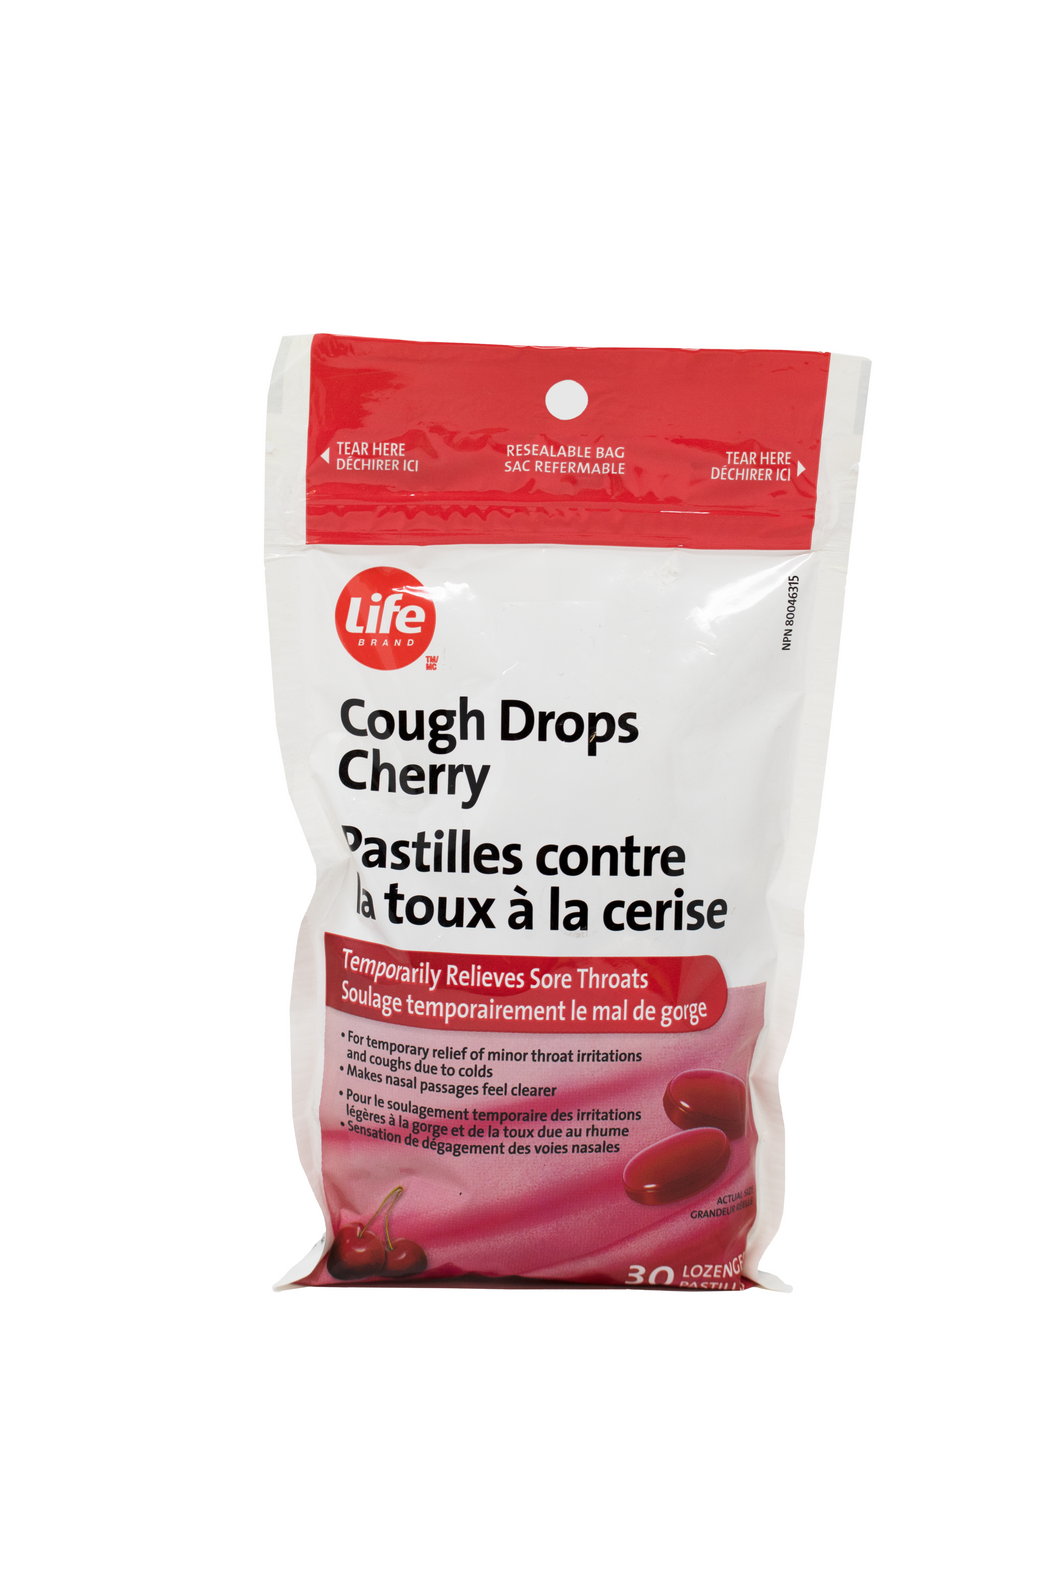 Life Brand Cough Drops Cherry 30 Pack